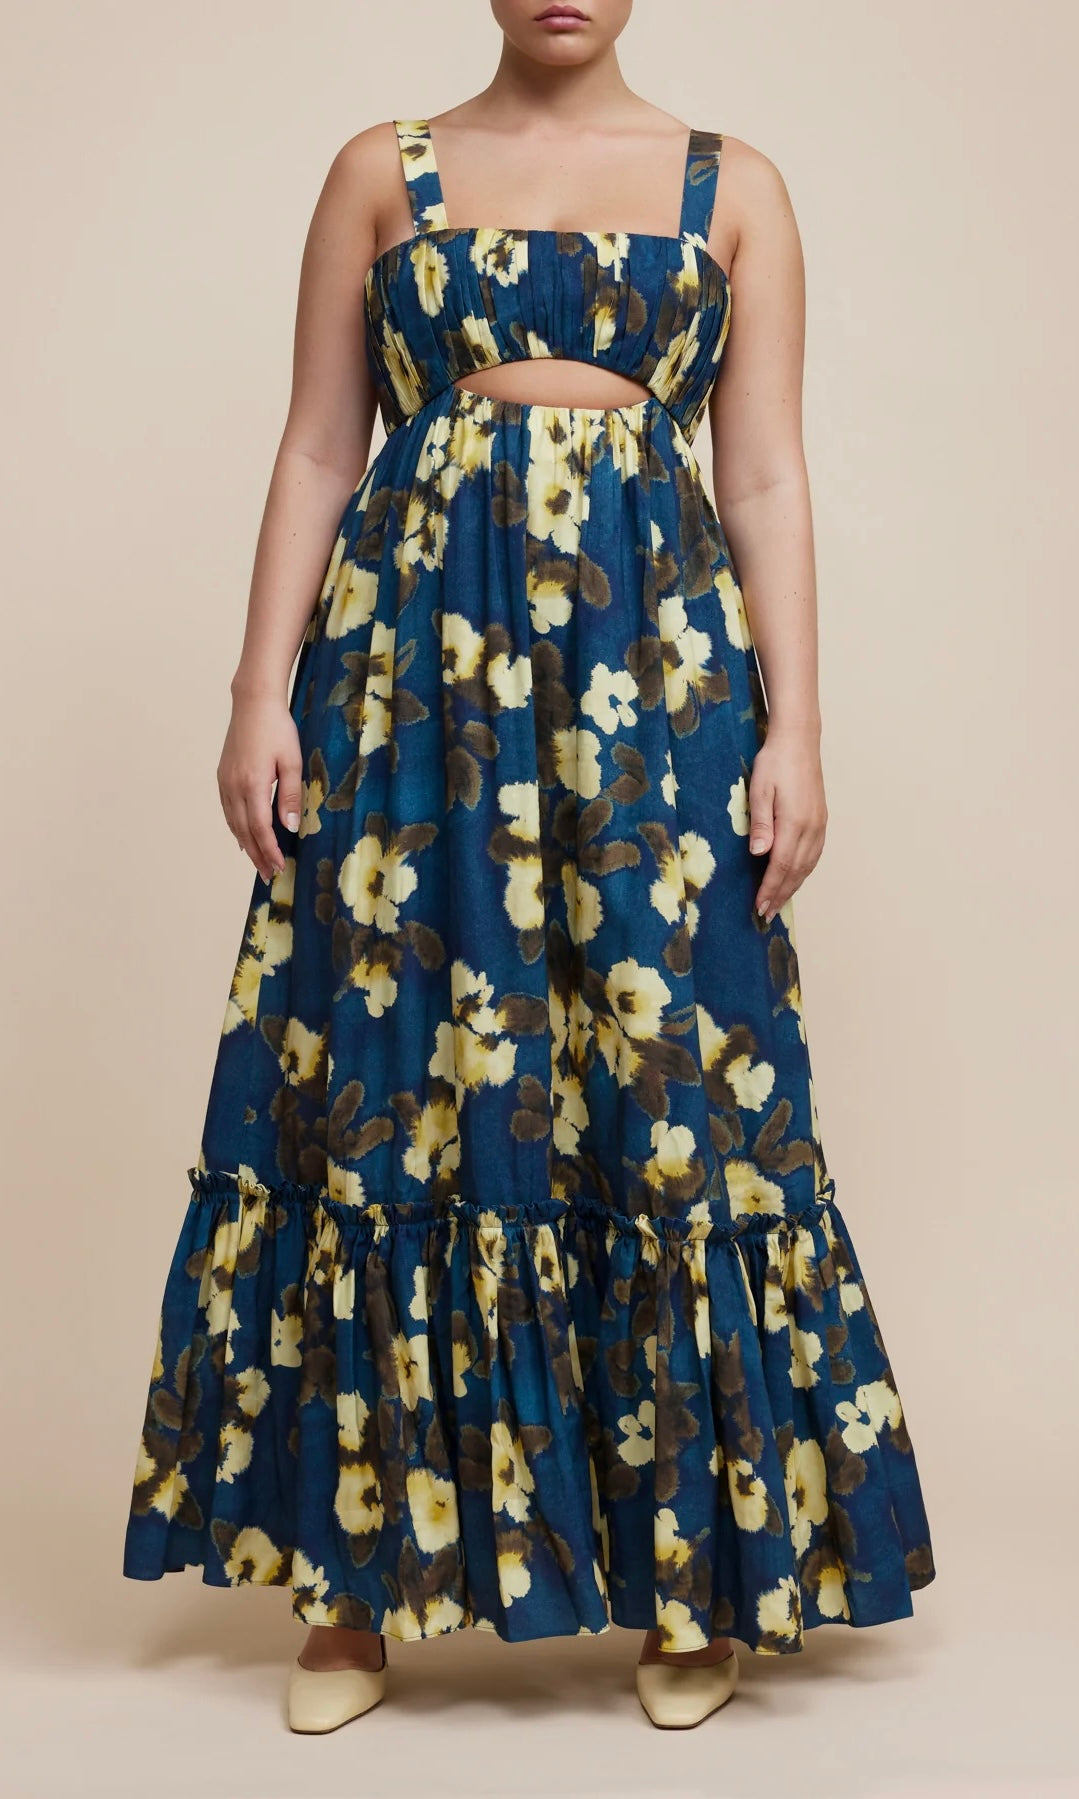 Acler Luddenham Dress In Floral Posy Print